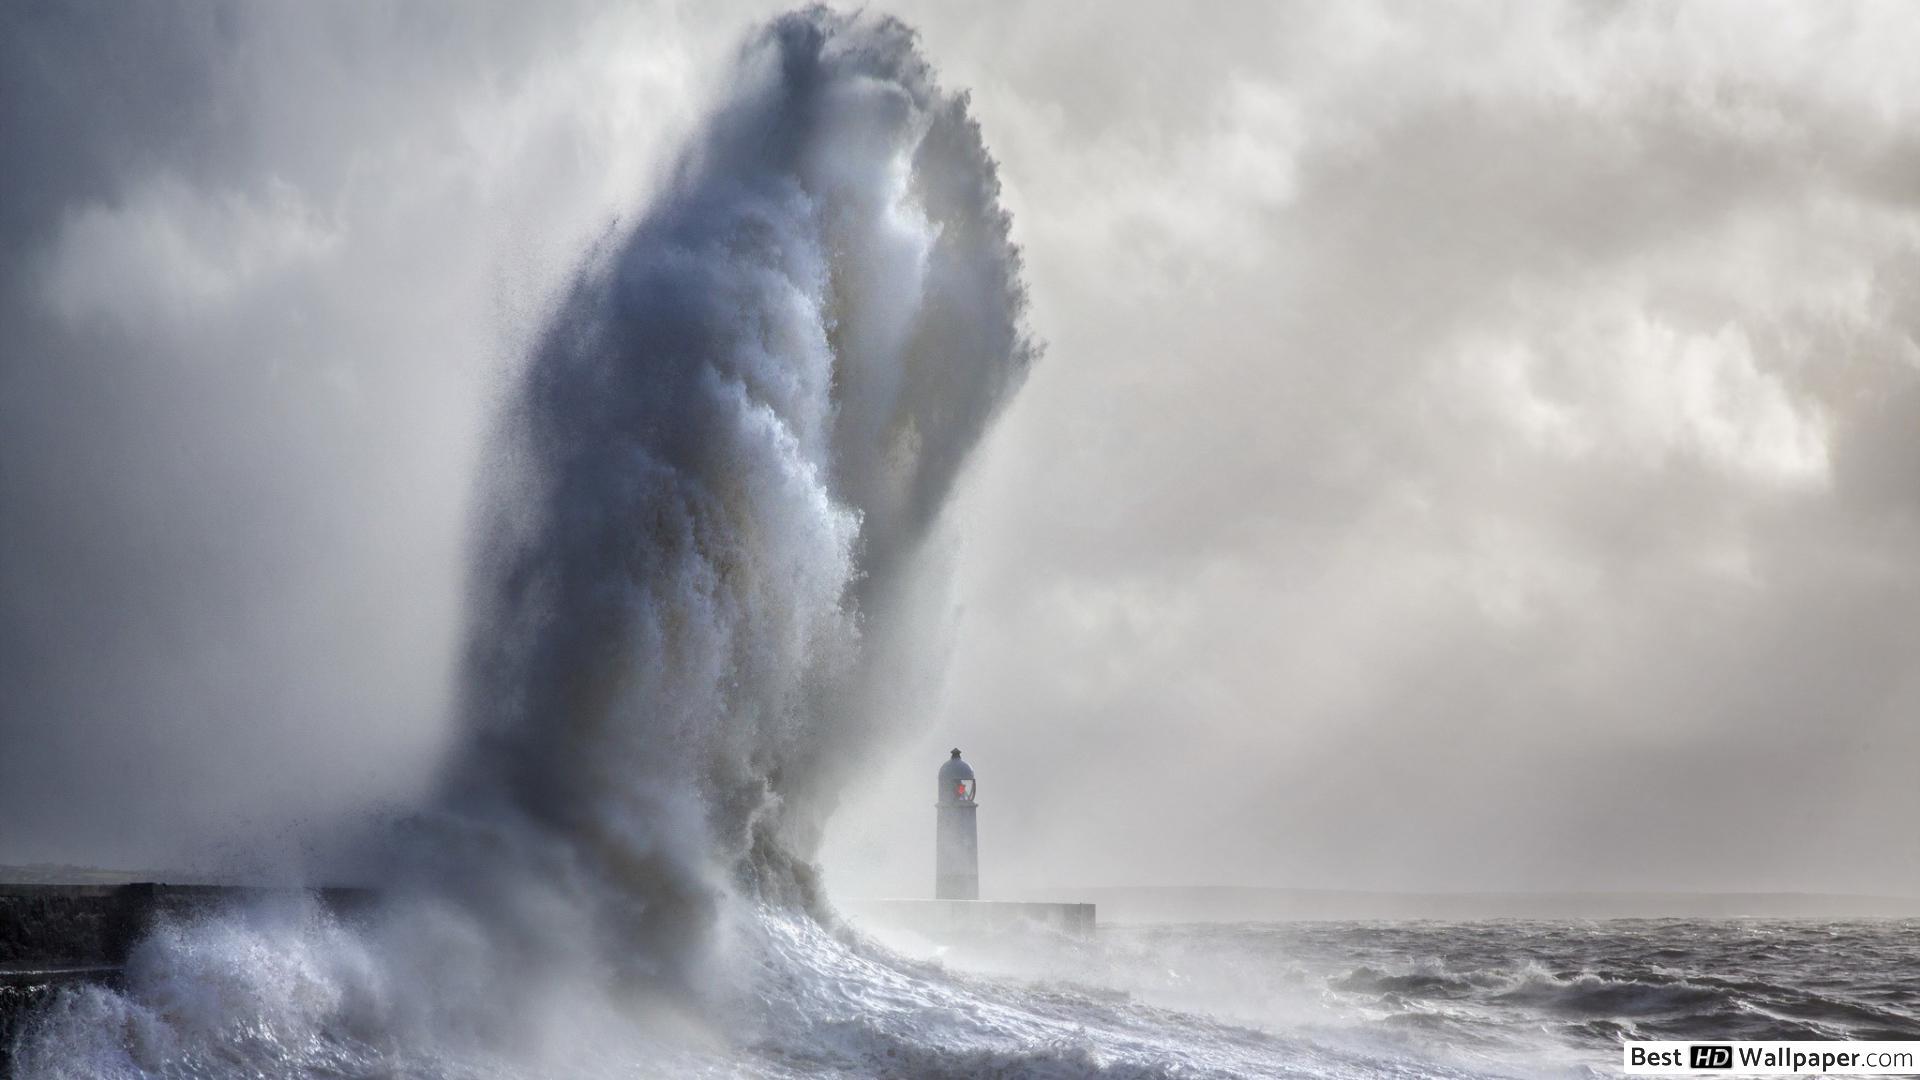 Lighthouse in Stormy Sea HD wallpaper download